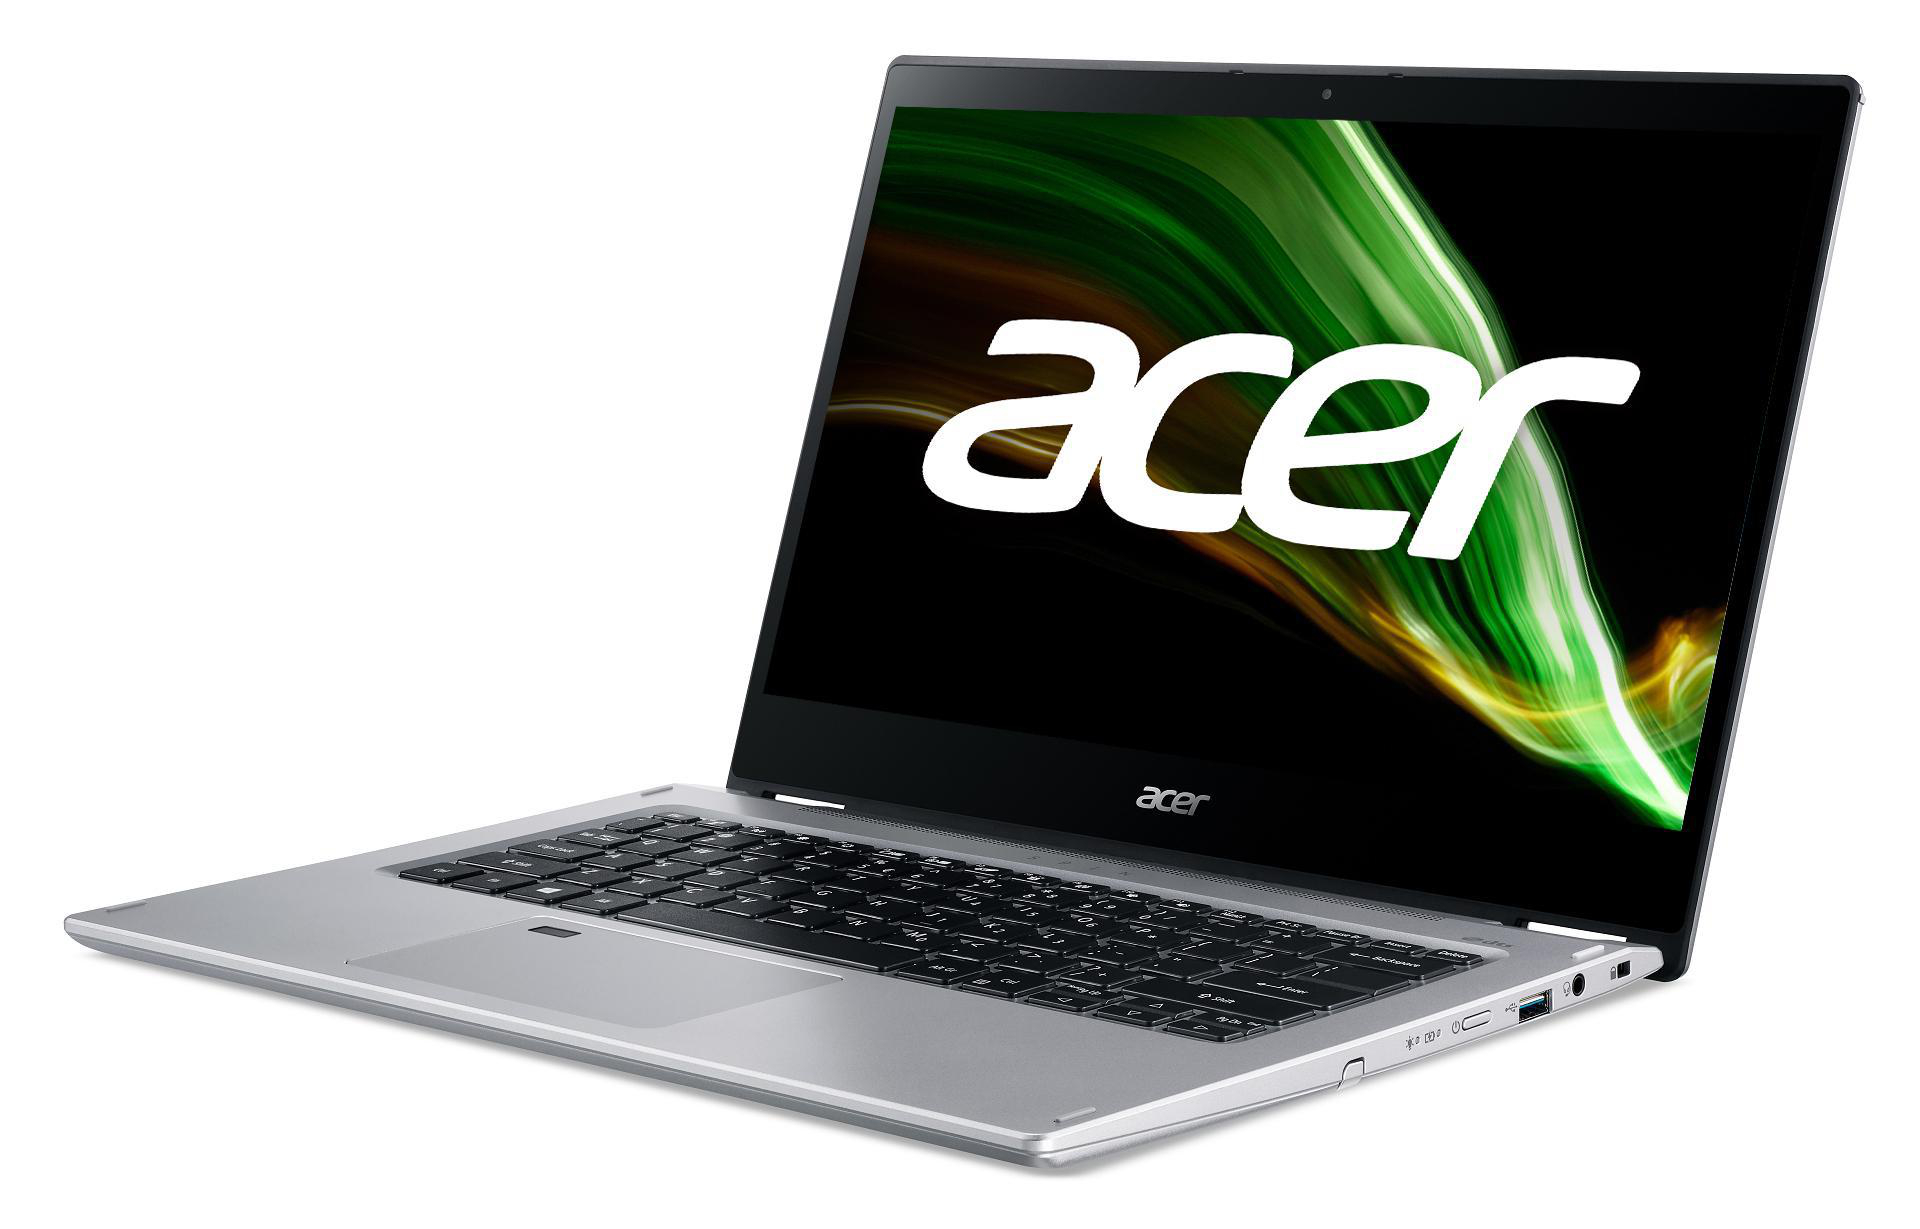 Home 3 RAM, Radeon™ S-Modus Zoll Silver Touchscreen, Spin GB Notebook, Silber SSD, AMD, 14 Windows AMD Bit) Prozessor, 4 GB mit Athlon™ Onboard Acer 10 (64 (SP314-21N-R686), 128 Display ACER Graphics,